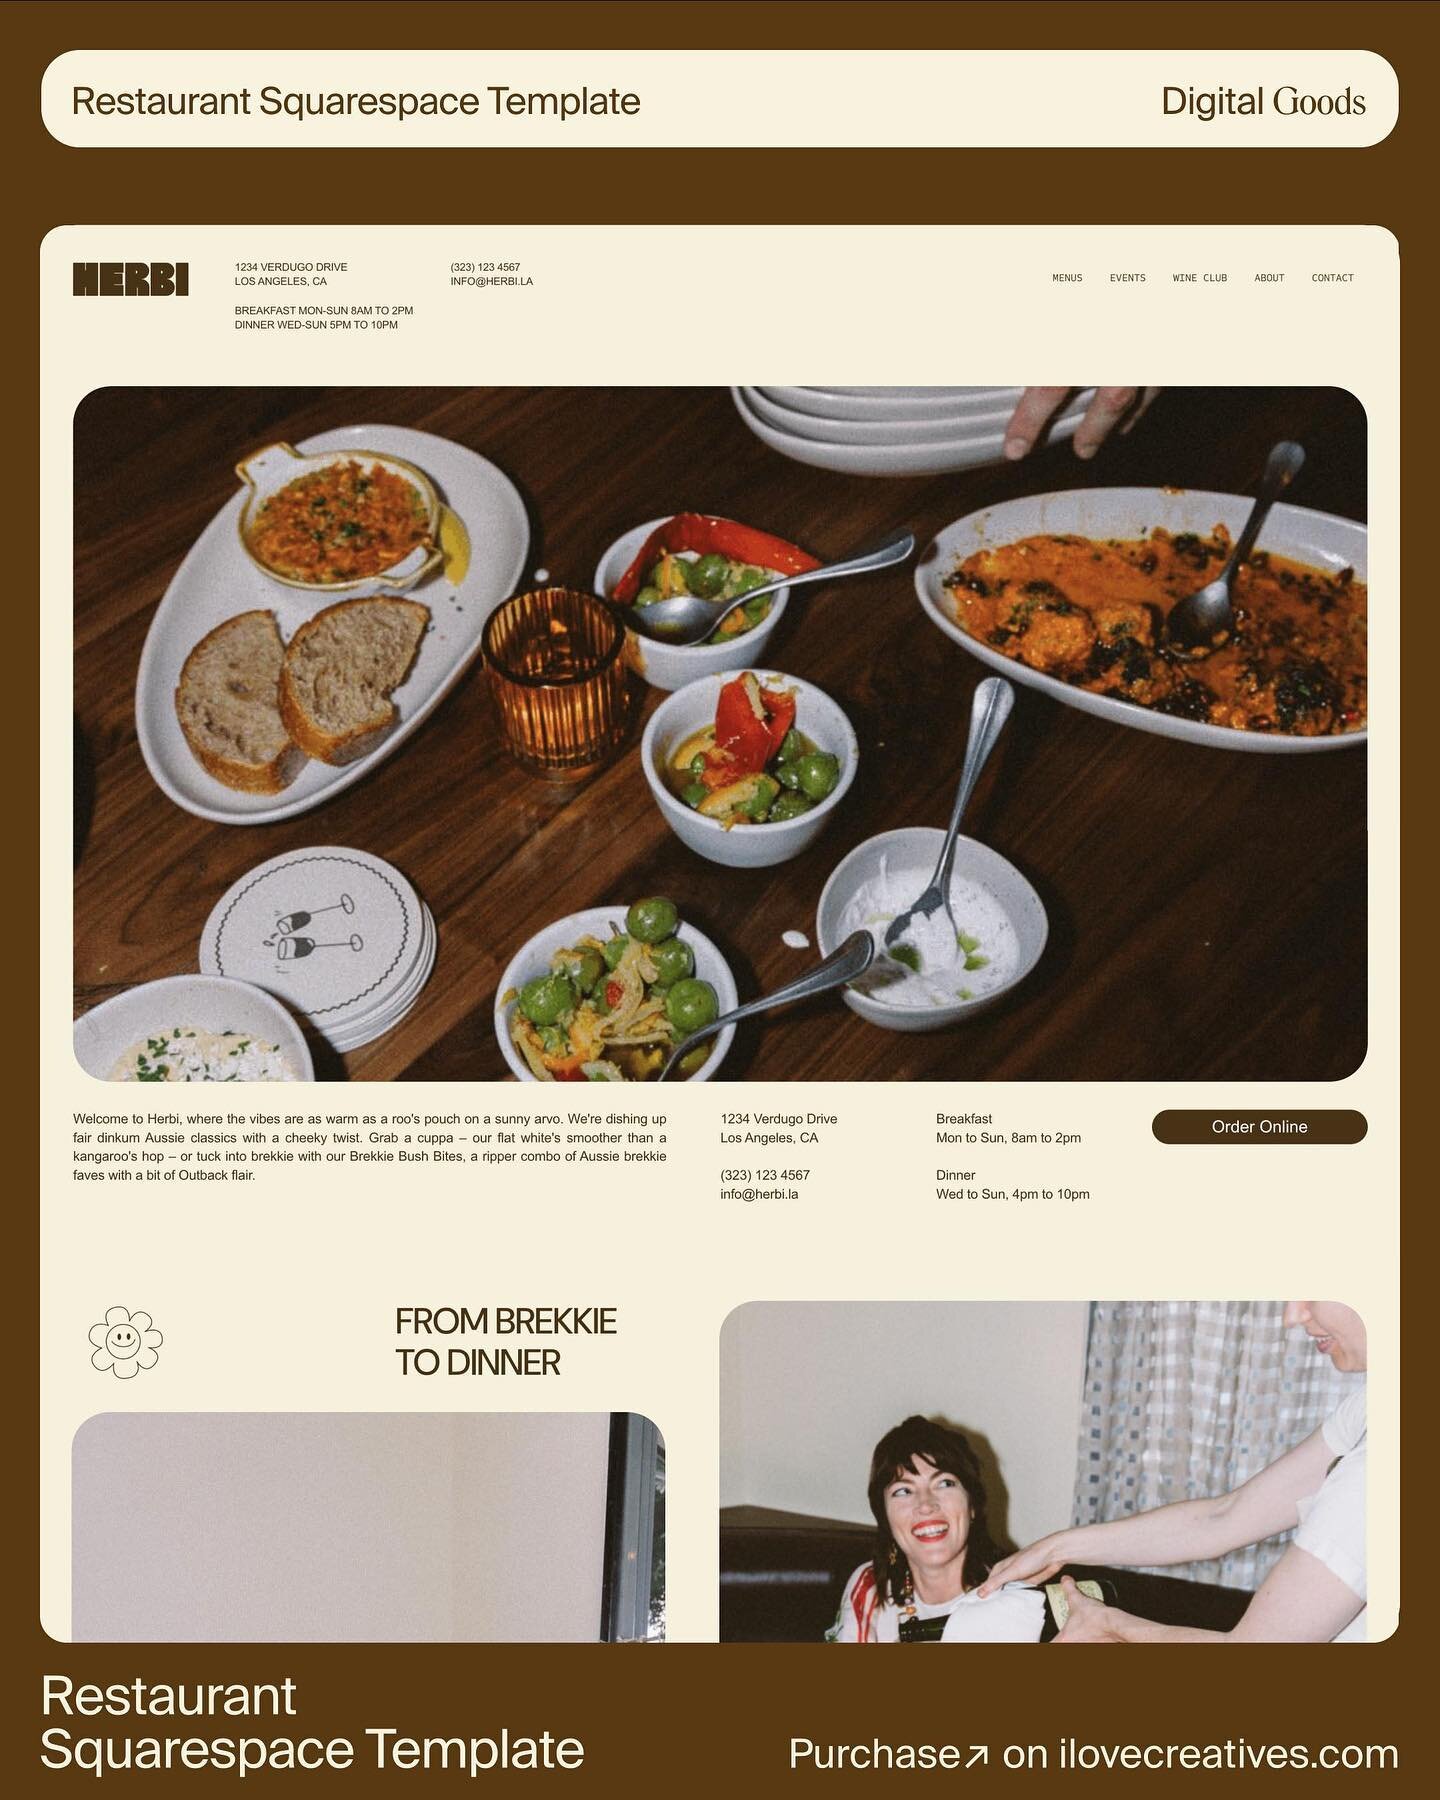 Ding, ding, ding 🛎&nbsp;Fresh Restaurant Squarespace Template comin&rsquo; right uppp 🍕

Launching a new restaurant business or looking to revamp the web for your neighborhood&rsquo;s go-to spot? We know how crucial it is for your restaurants to be